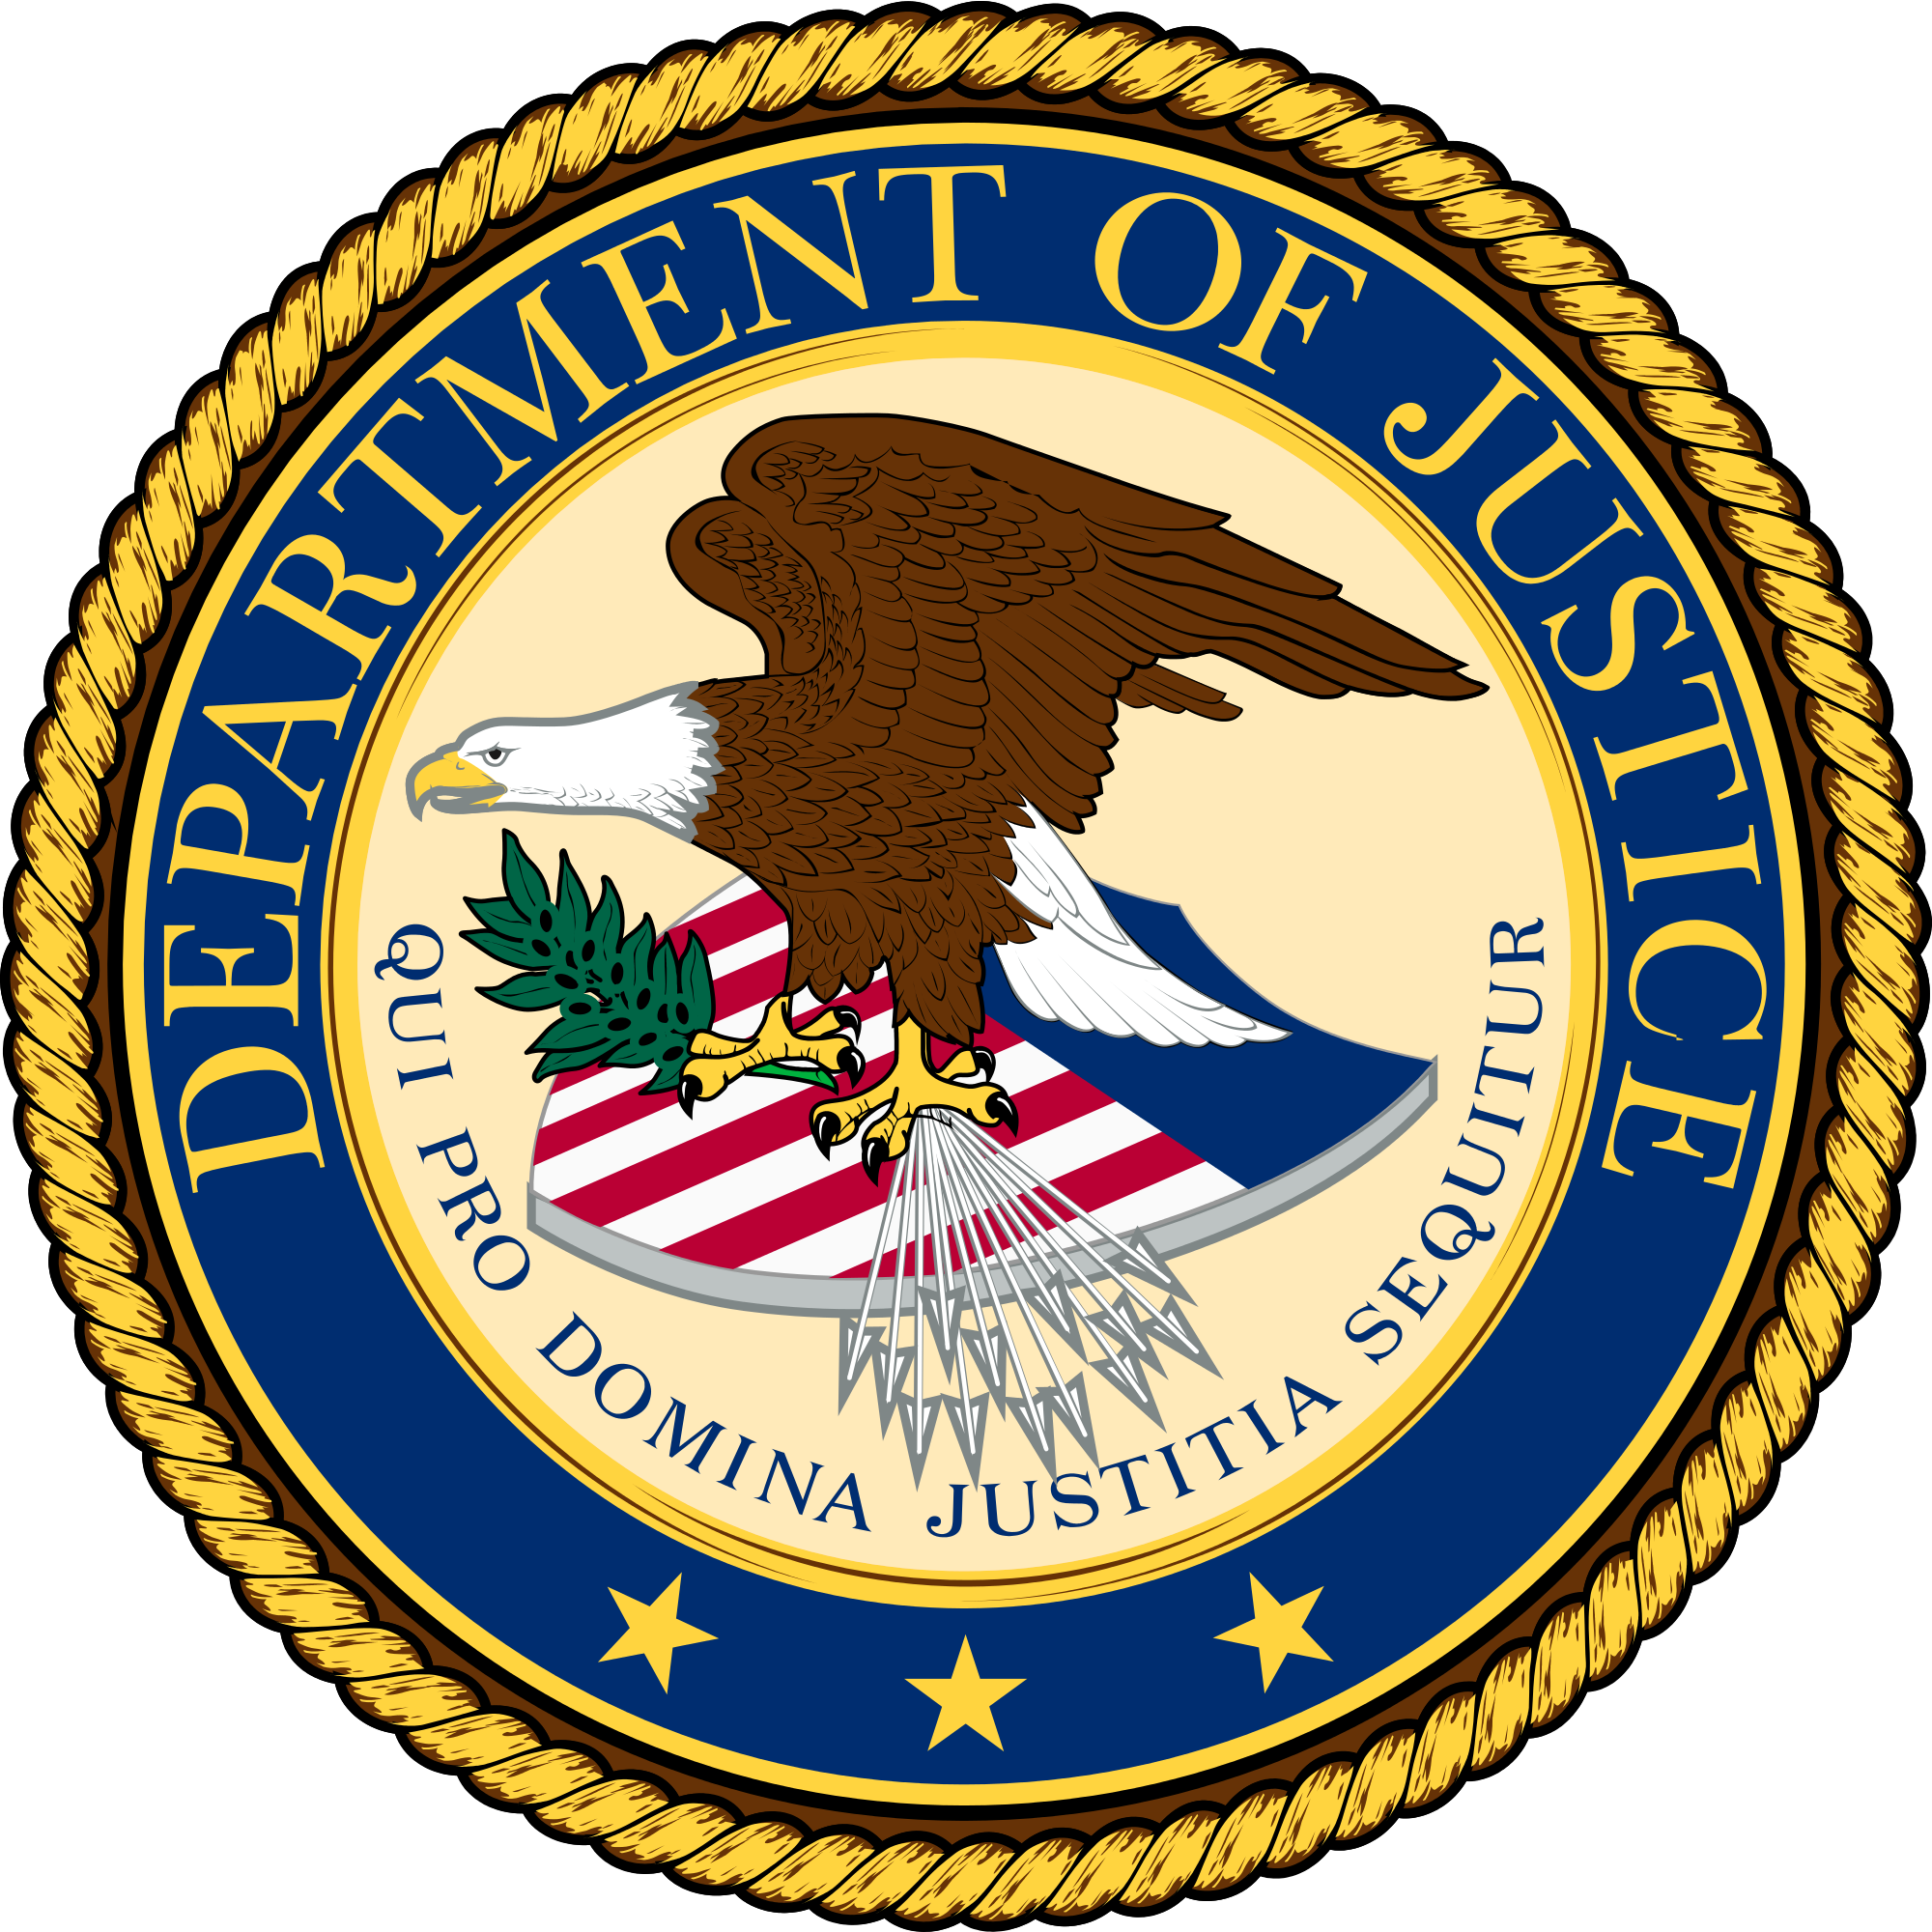 United States Department of Justice - Wikipedia, the free encyclopedia